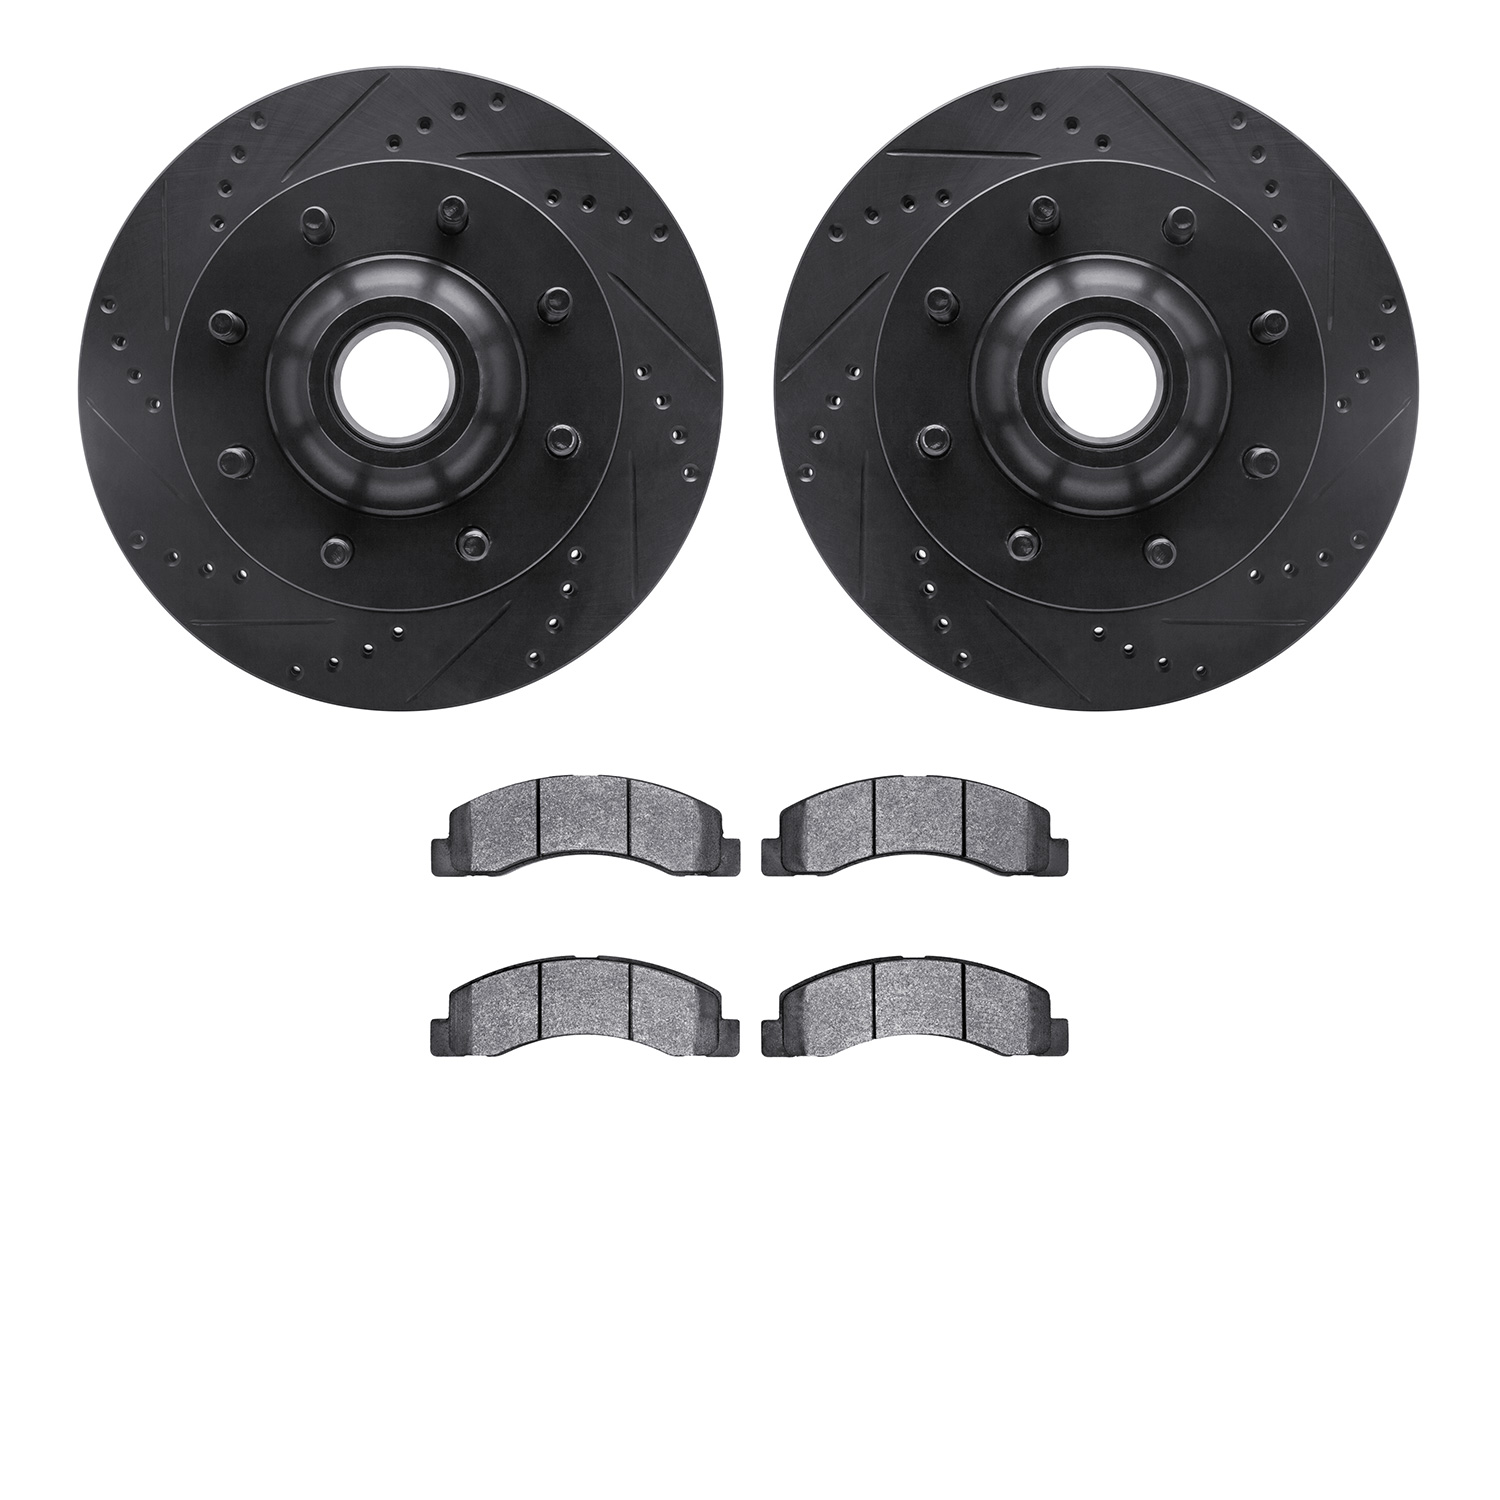 8402-54049 Drilled/Slotted Brake Rotors with Ultimate-Duty Brake Pads Kit [Black], 1999-2002 Ford/Lincoln/Mercury/Mazda, Positio